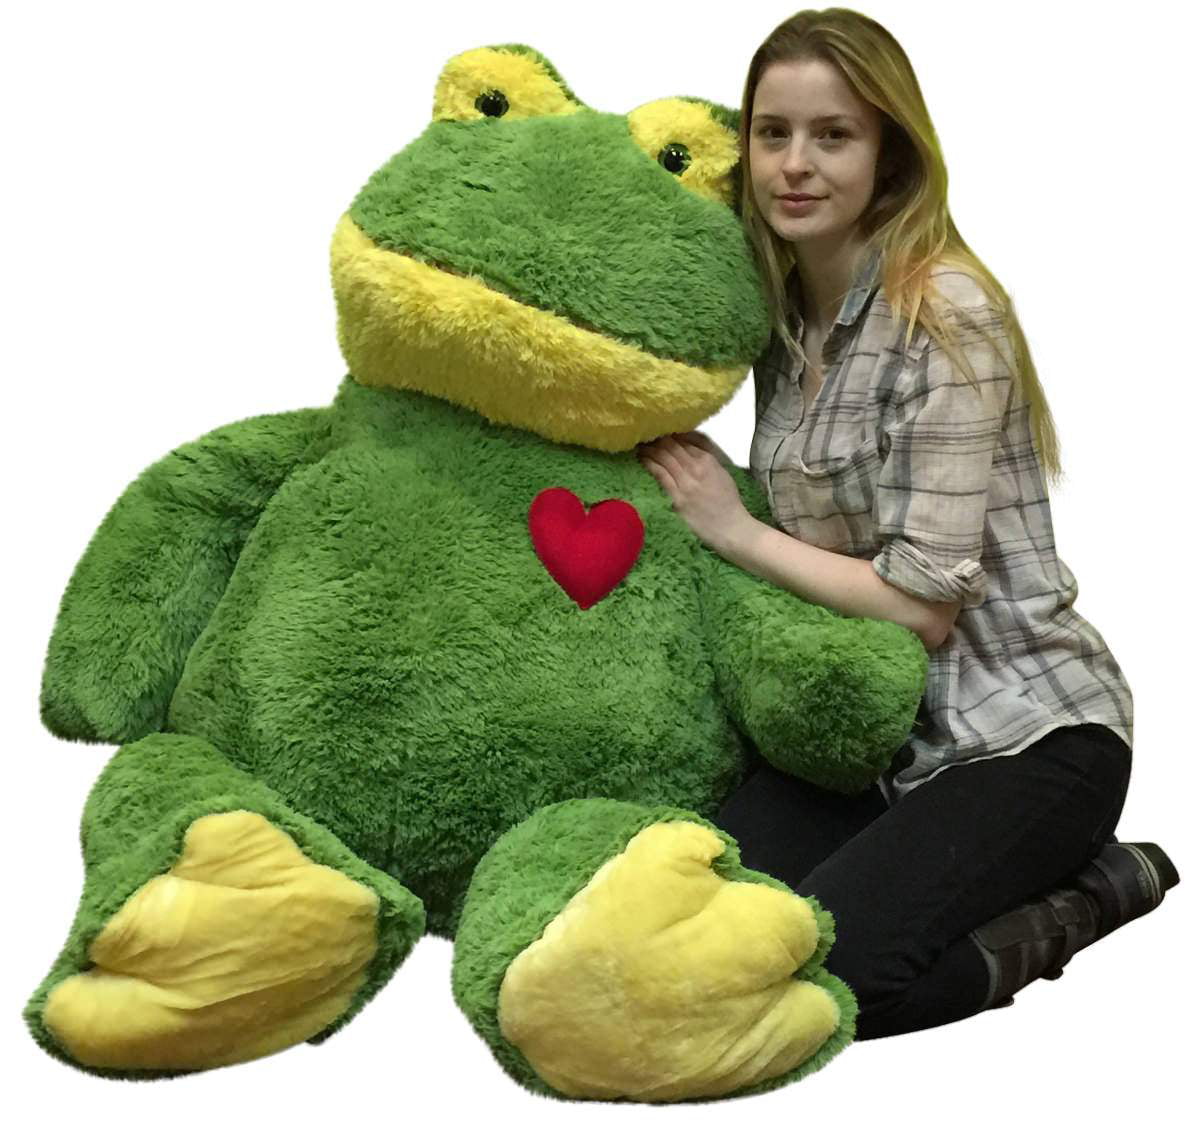 Plush Giant Frog Stuffed Animal Soft Toy 22 Inches Large Green 